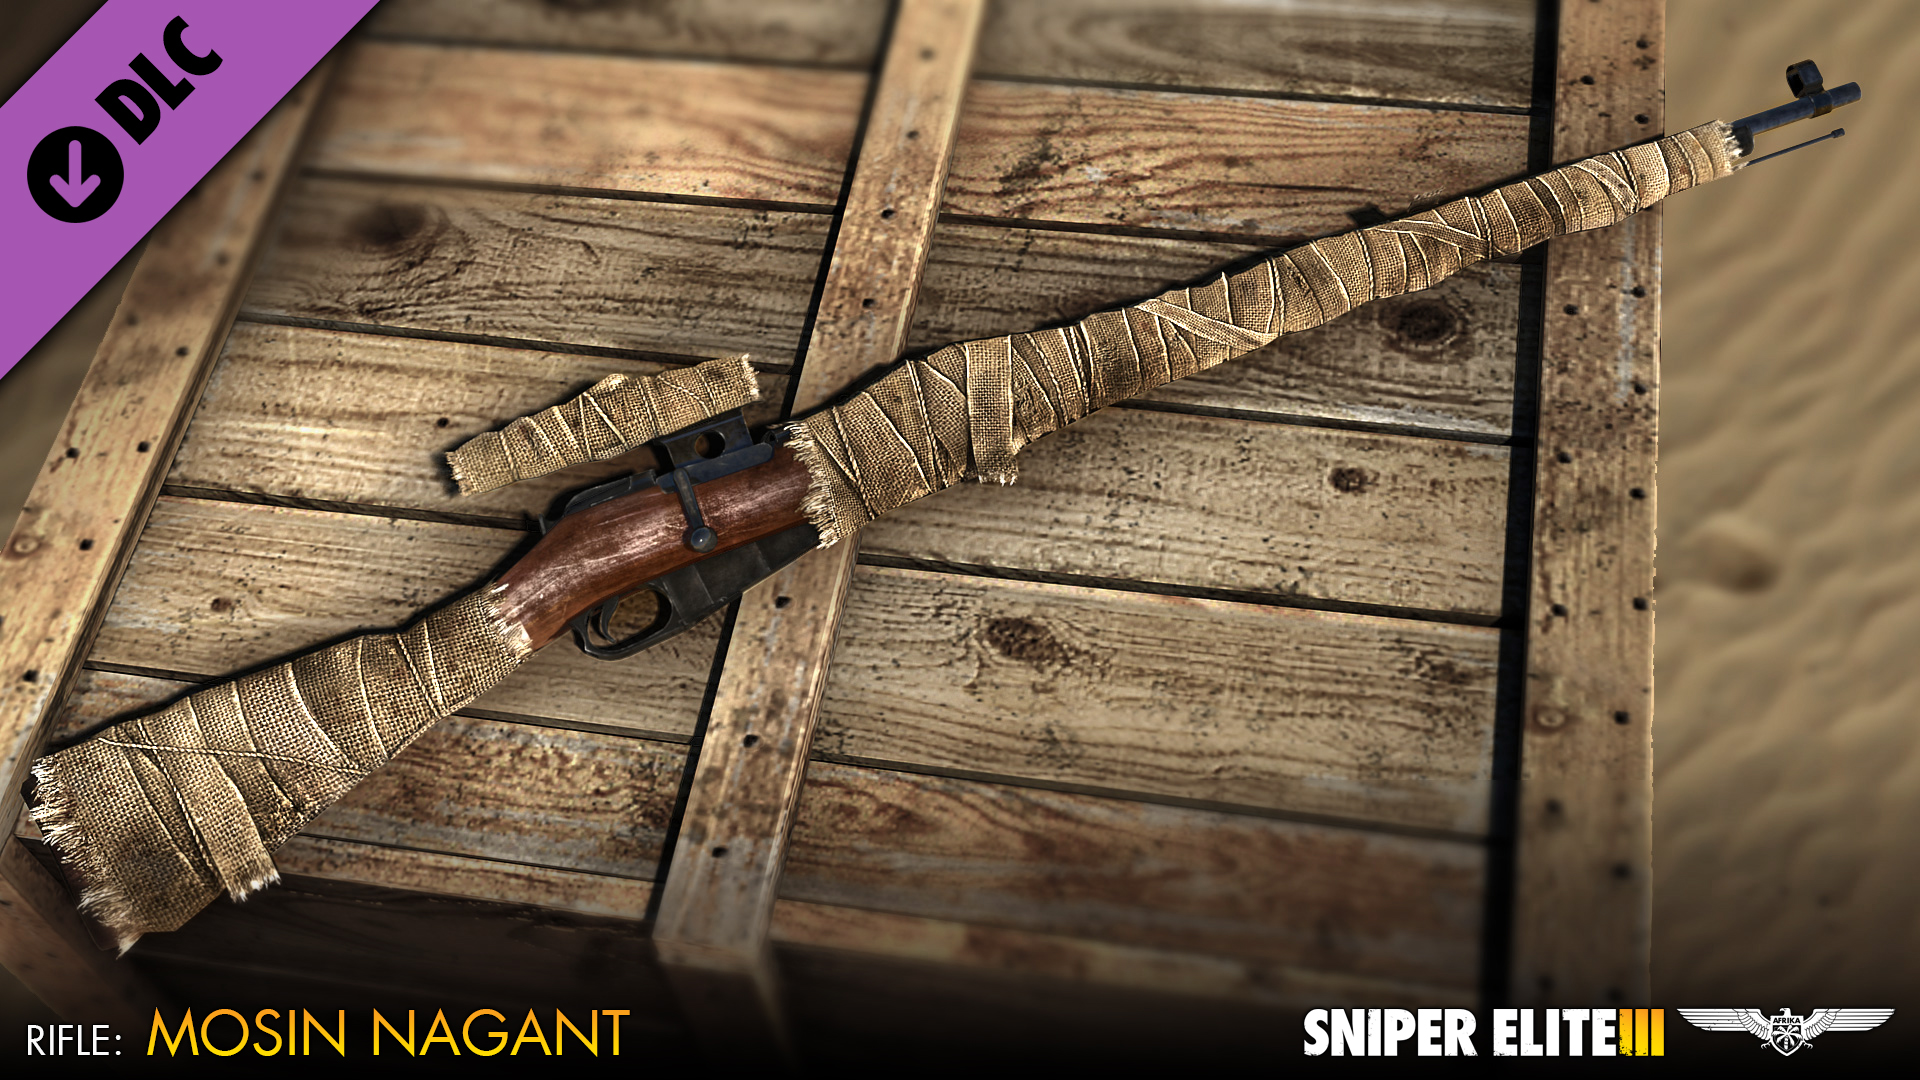 Sniper Elite 3 - Camouflage Weapons Pack screenshot